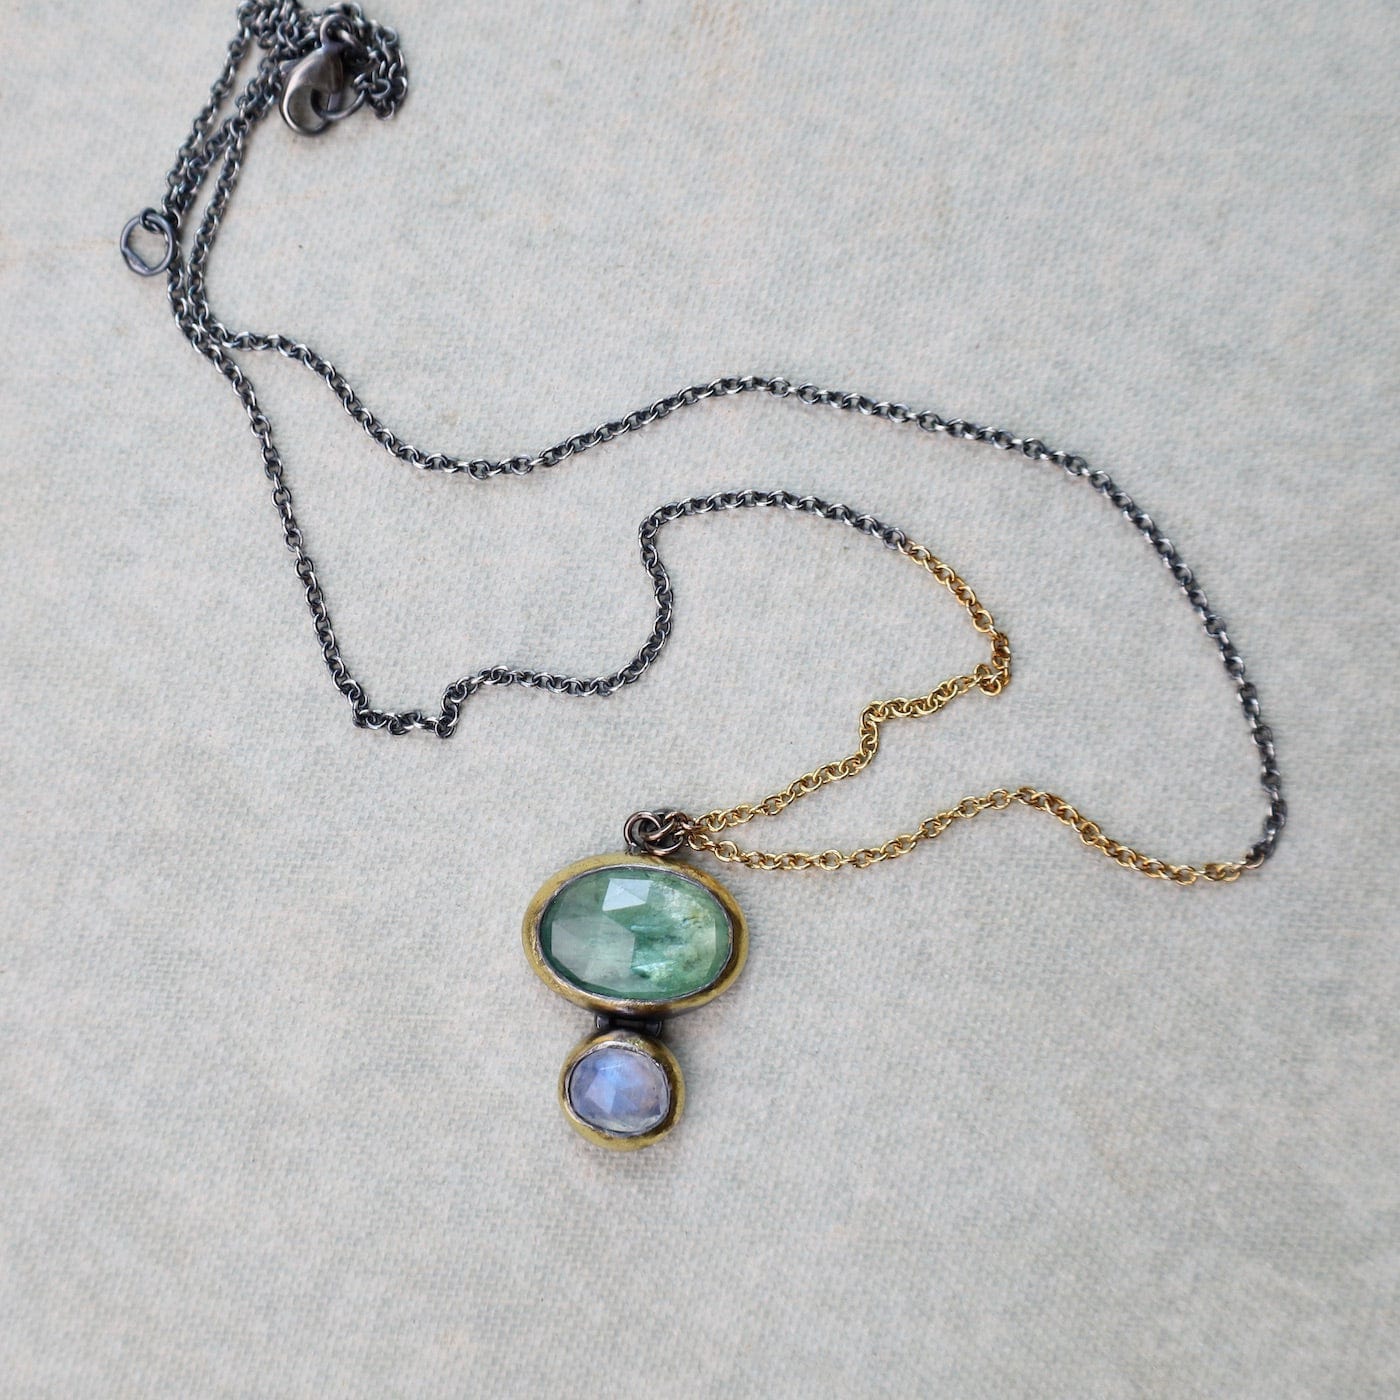 NKL Double Rim Necklace with Split Chain - Green Kyanite & Moonstone